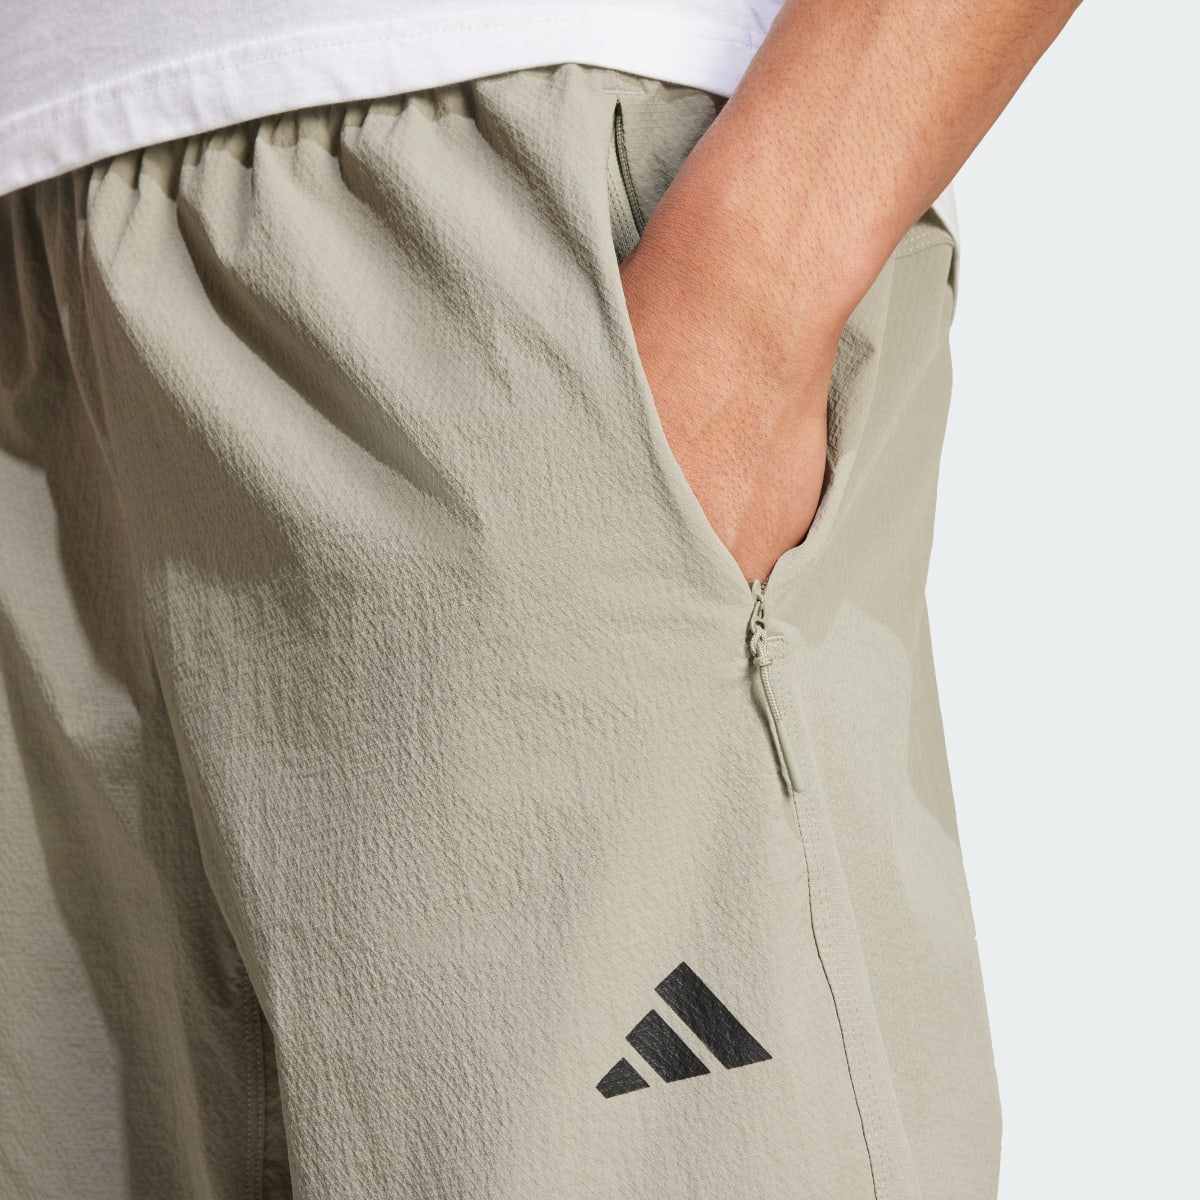 Adidas Designed for Training Workout Joggers. 7